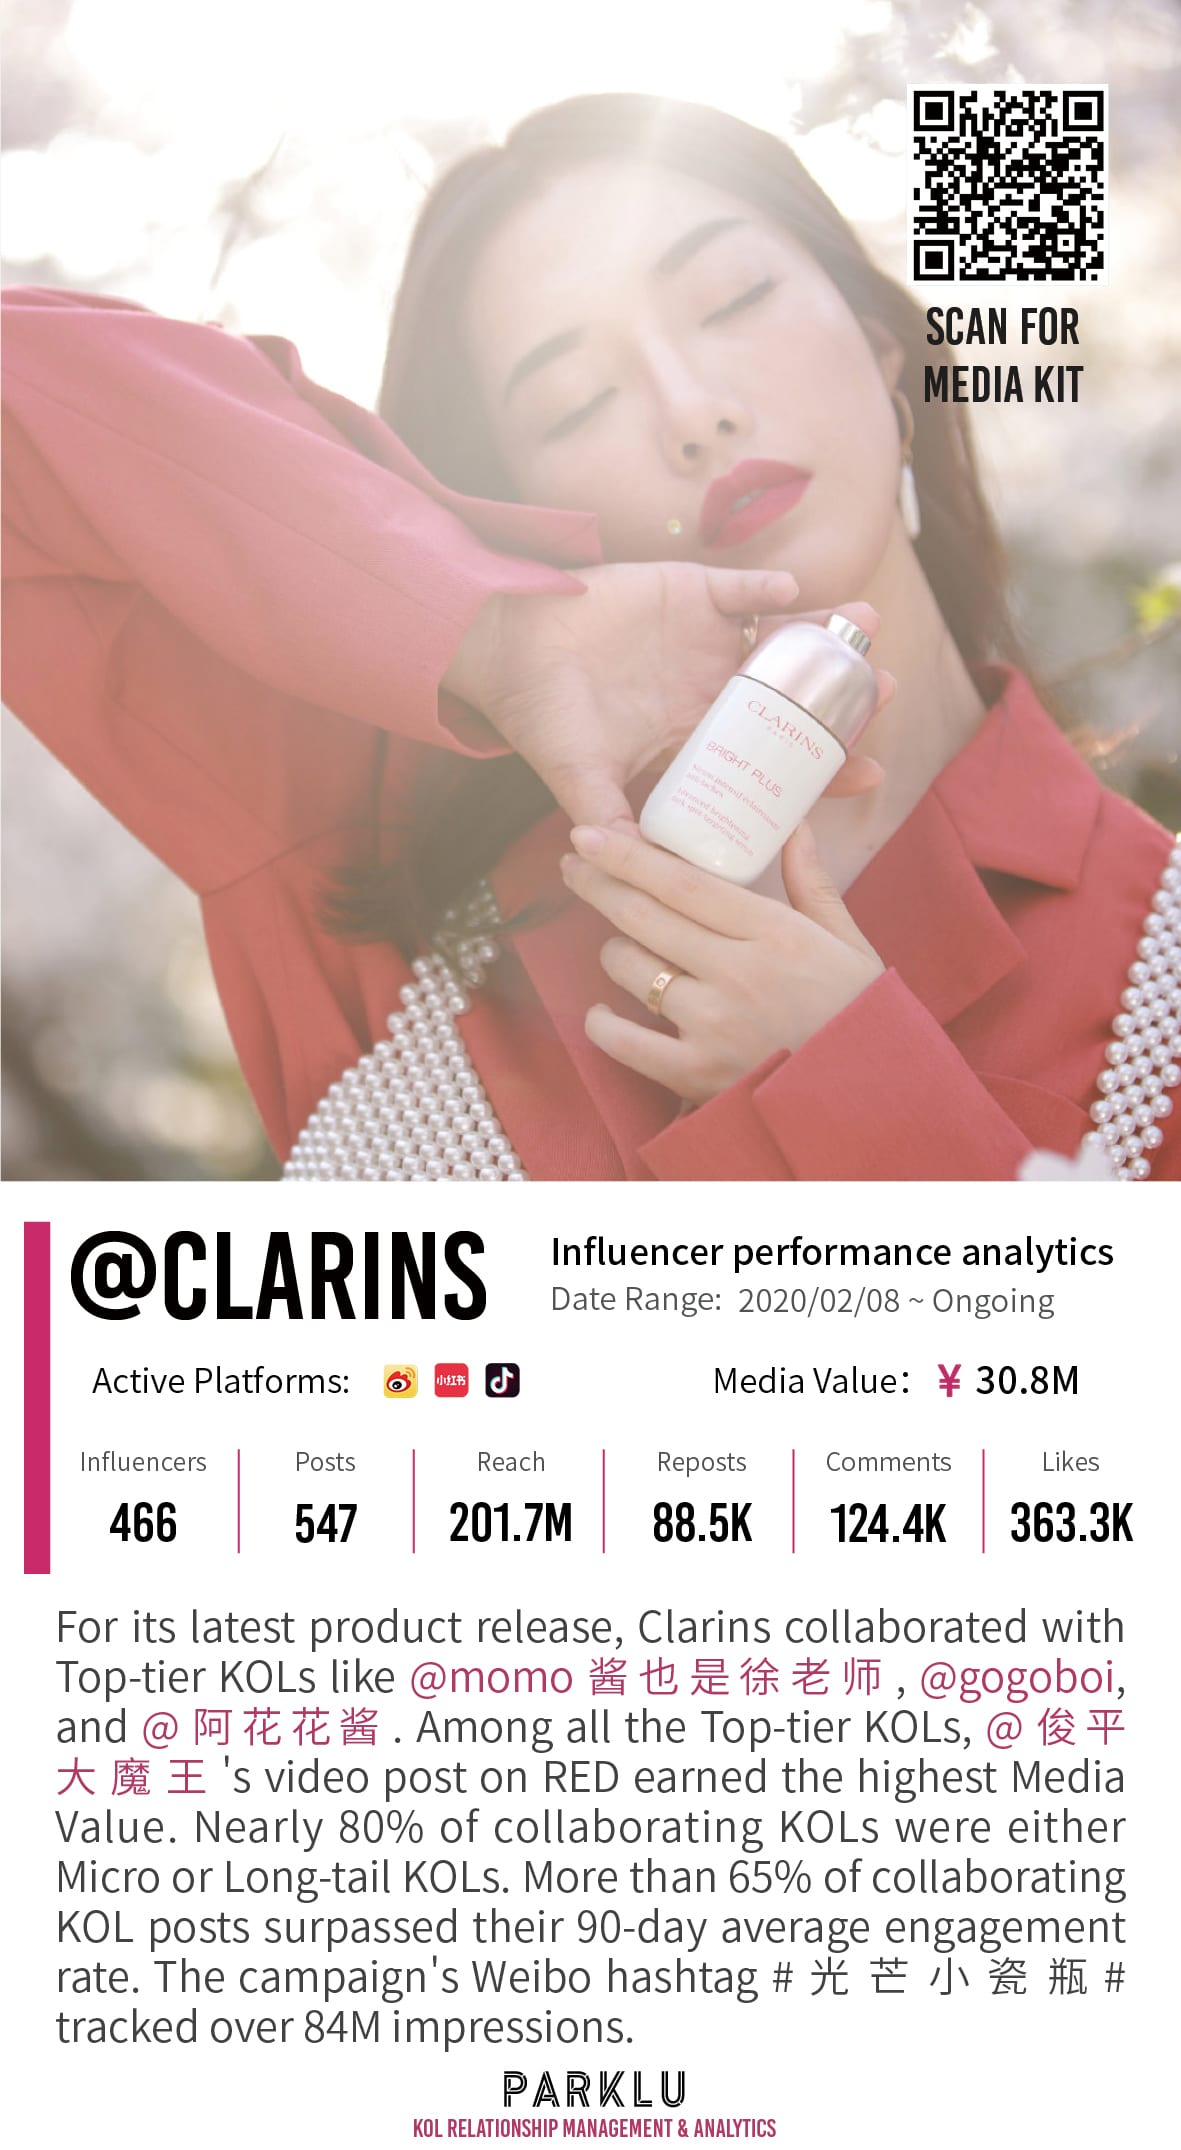 The Latest Products of Clarins